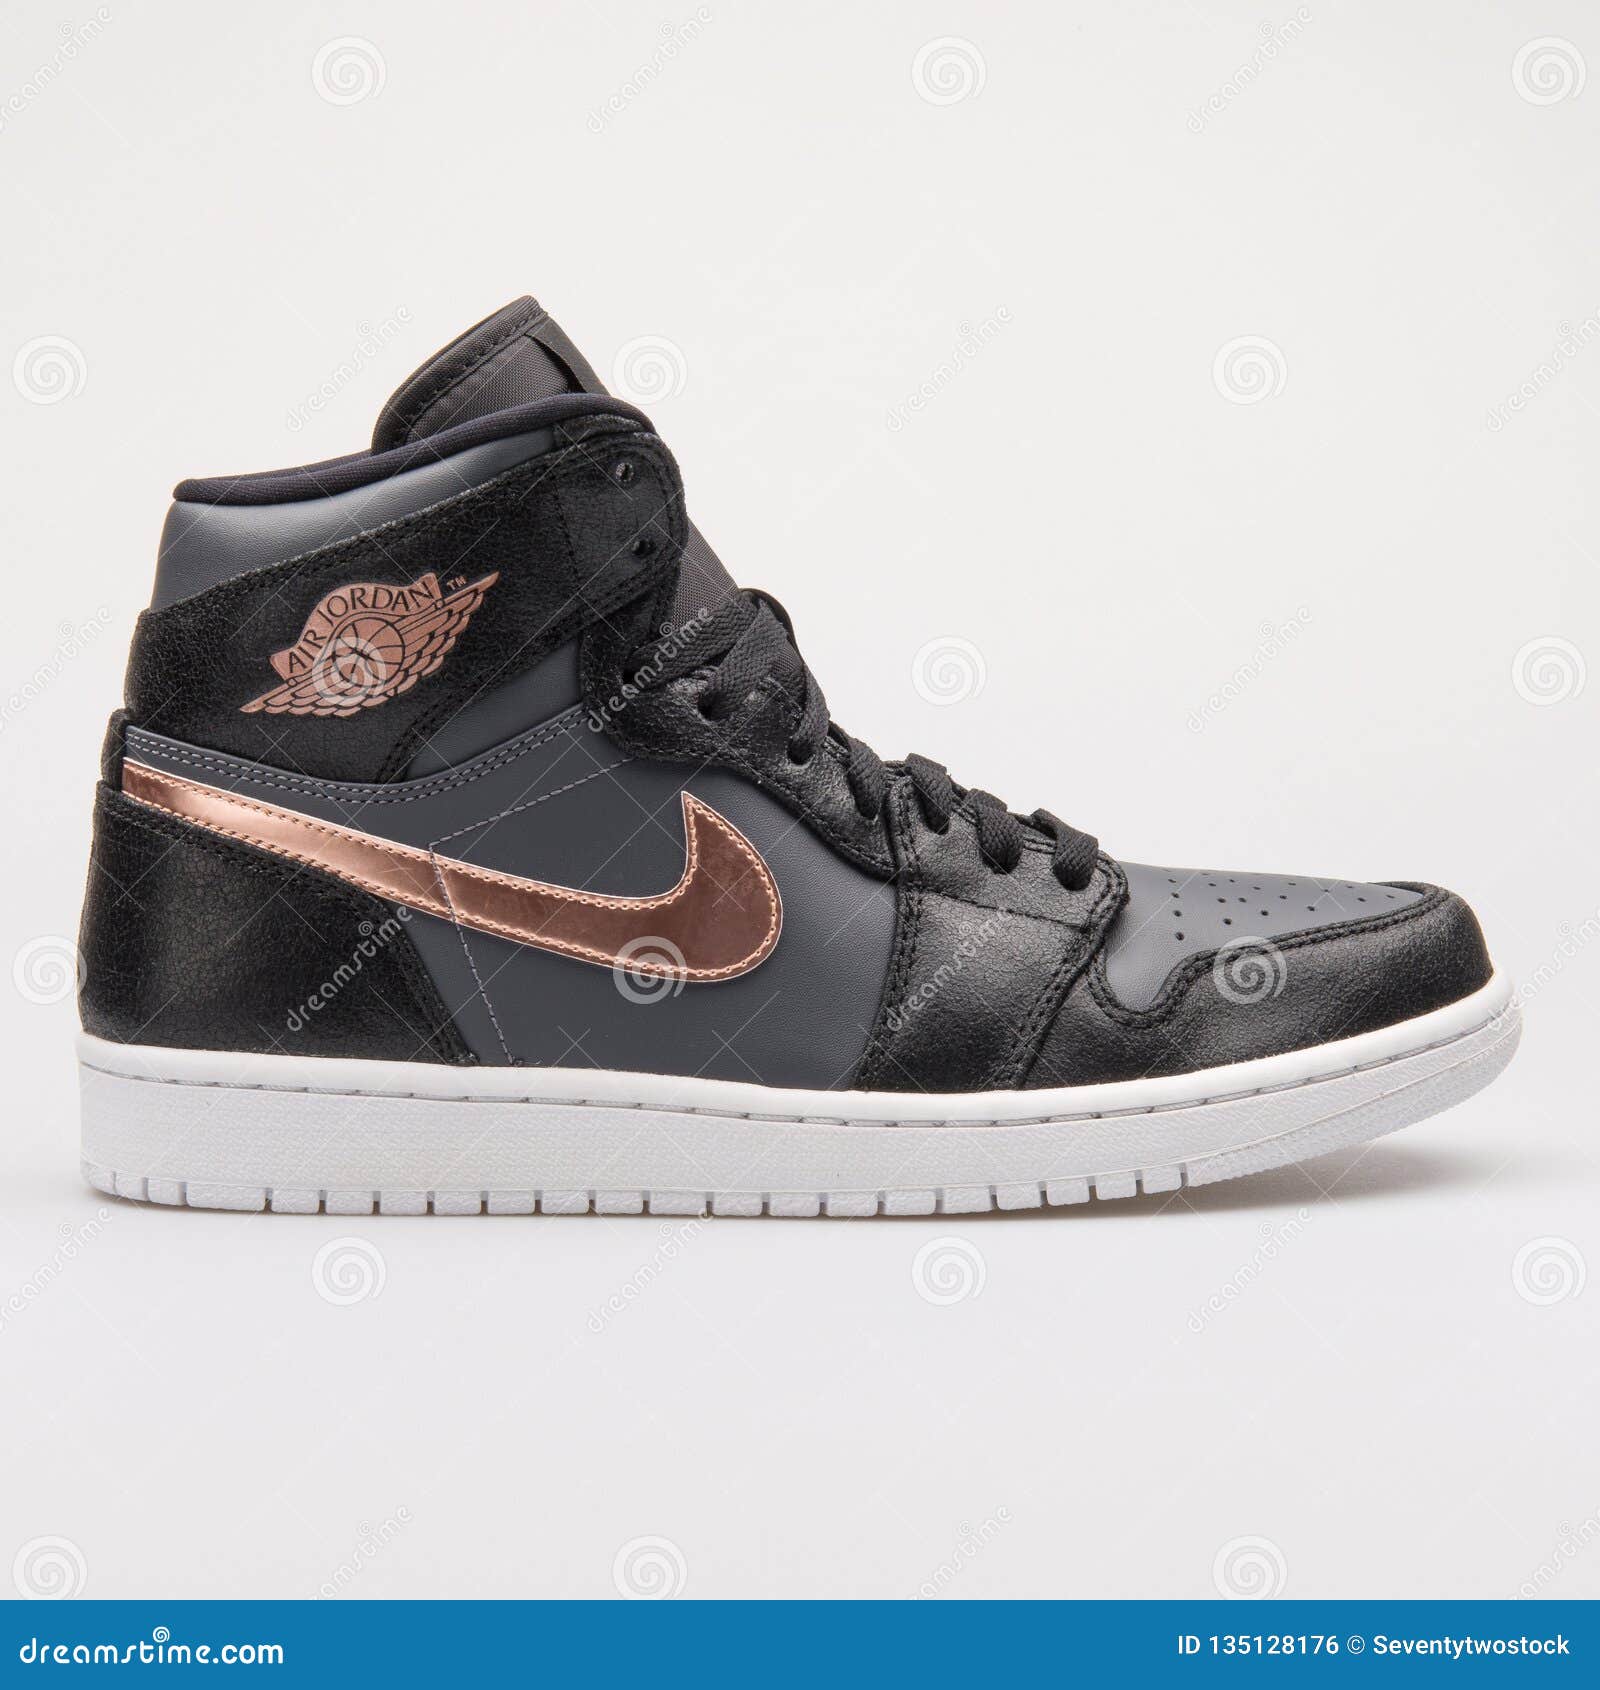 nike shoes black and rose gold